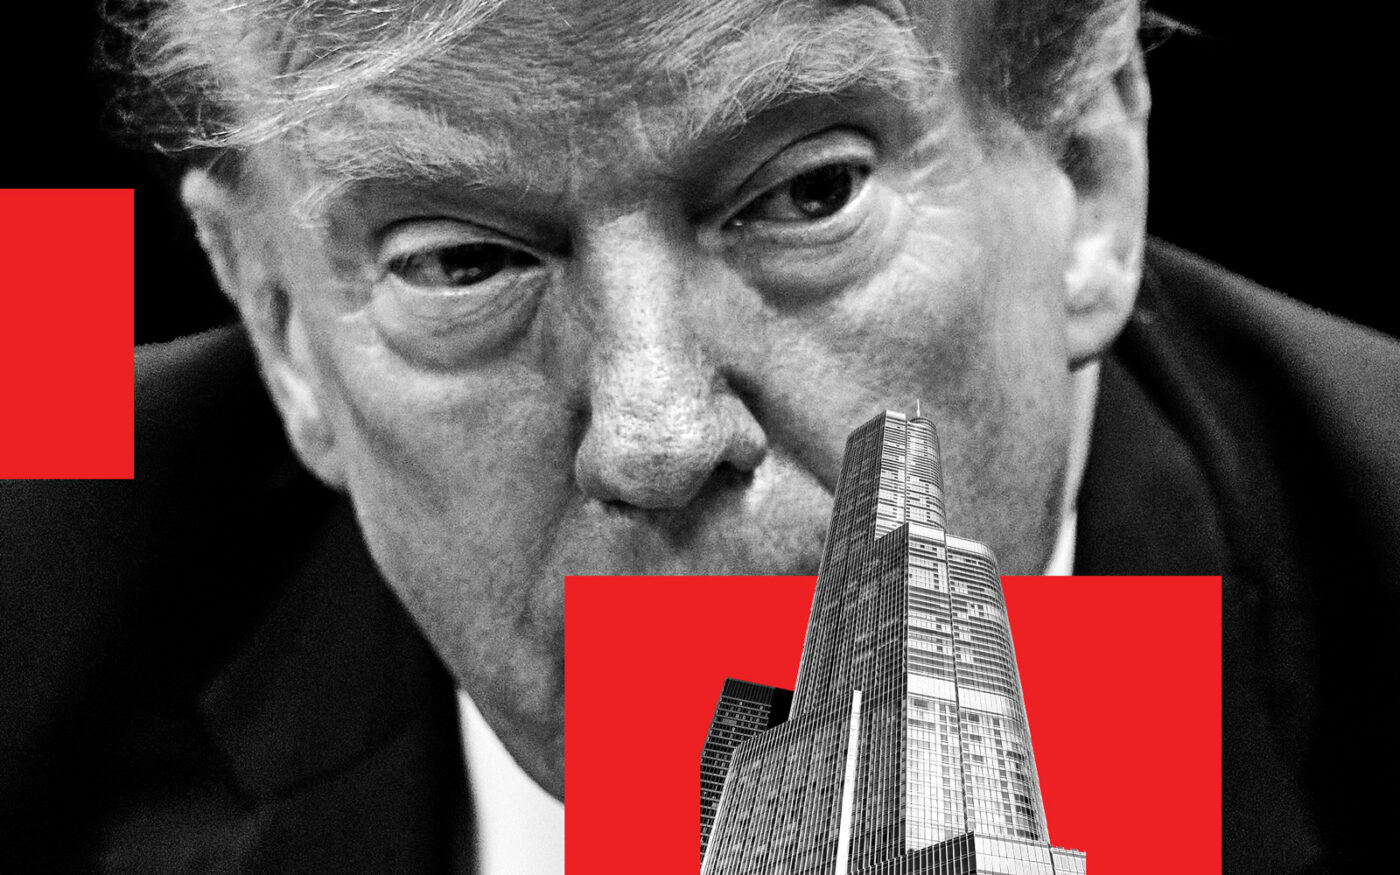 Trump Accused of False Statements on $50M Tied to Chicago Tower